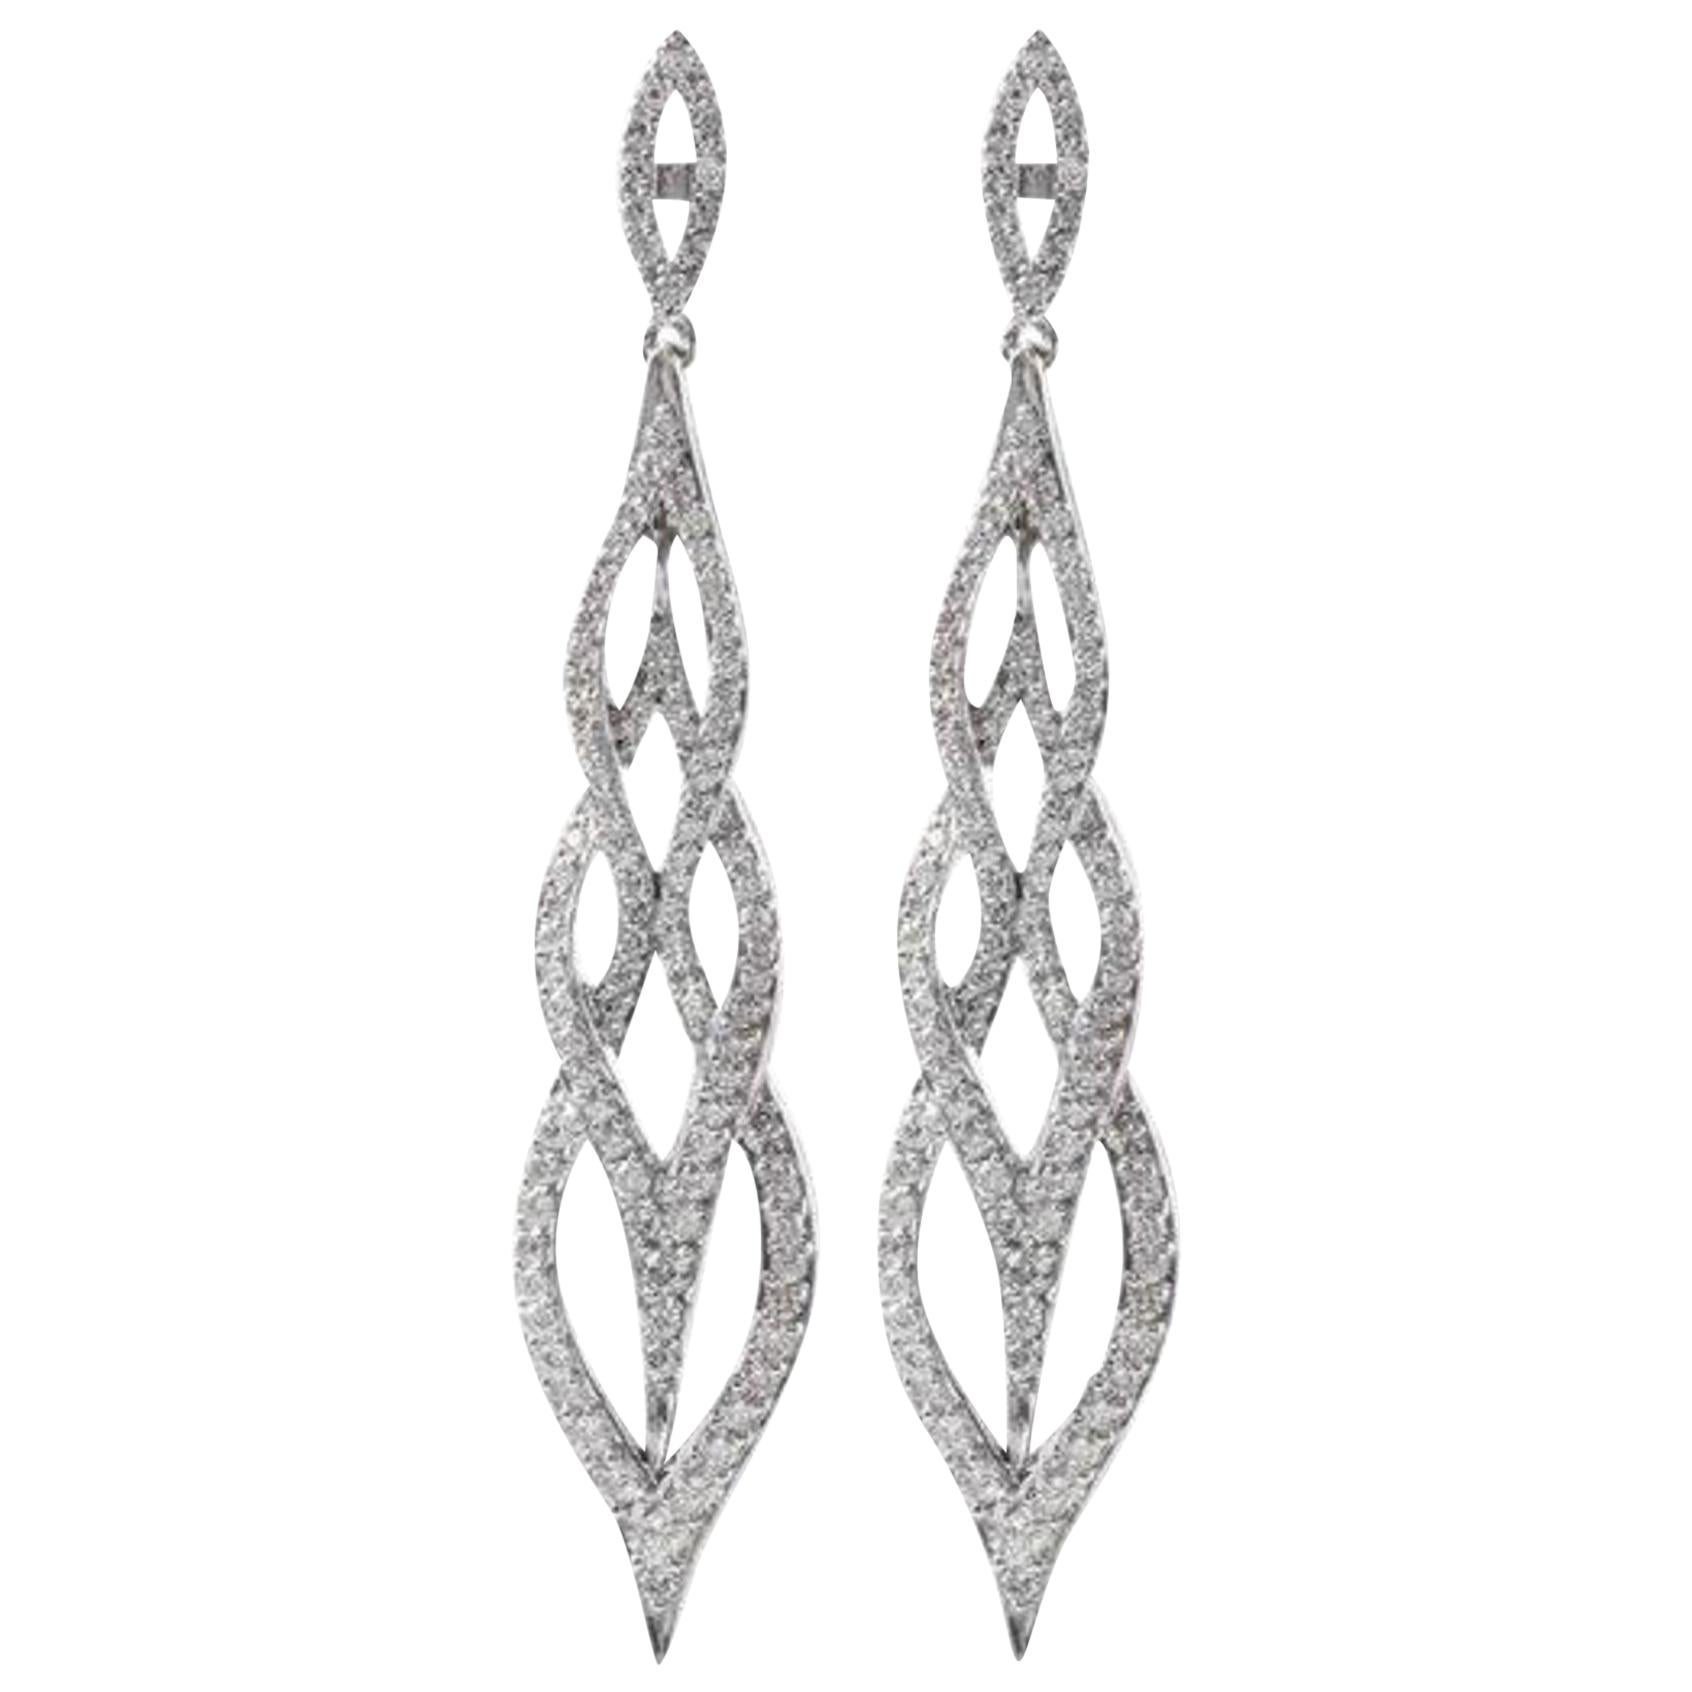 Exquisite 2.62 Carat Natural Diamond 18 Karat Solid White Gold Earrings For Sale